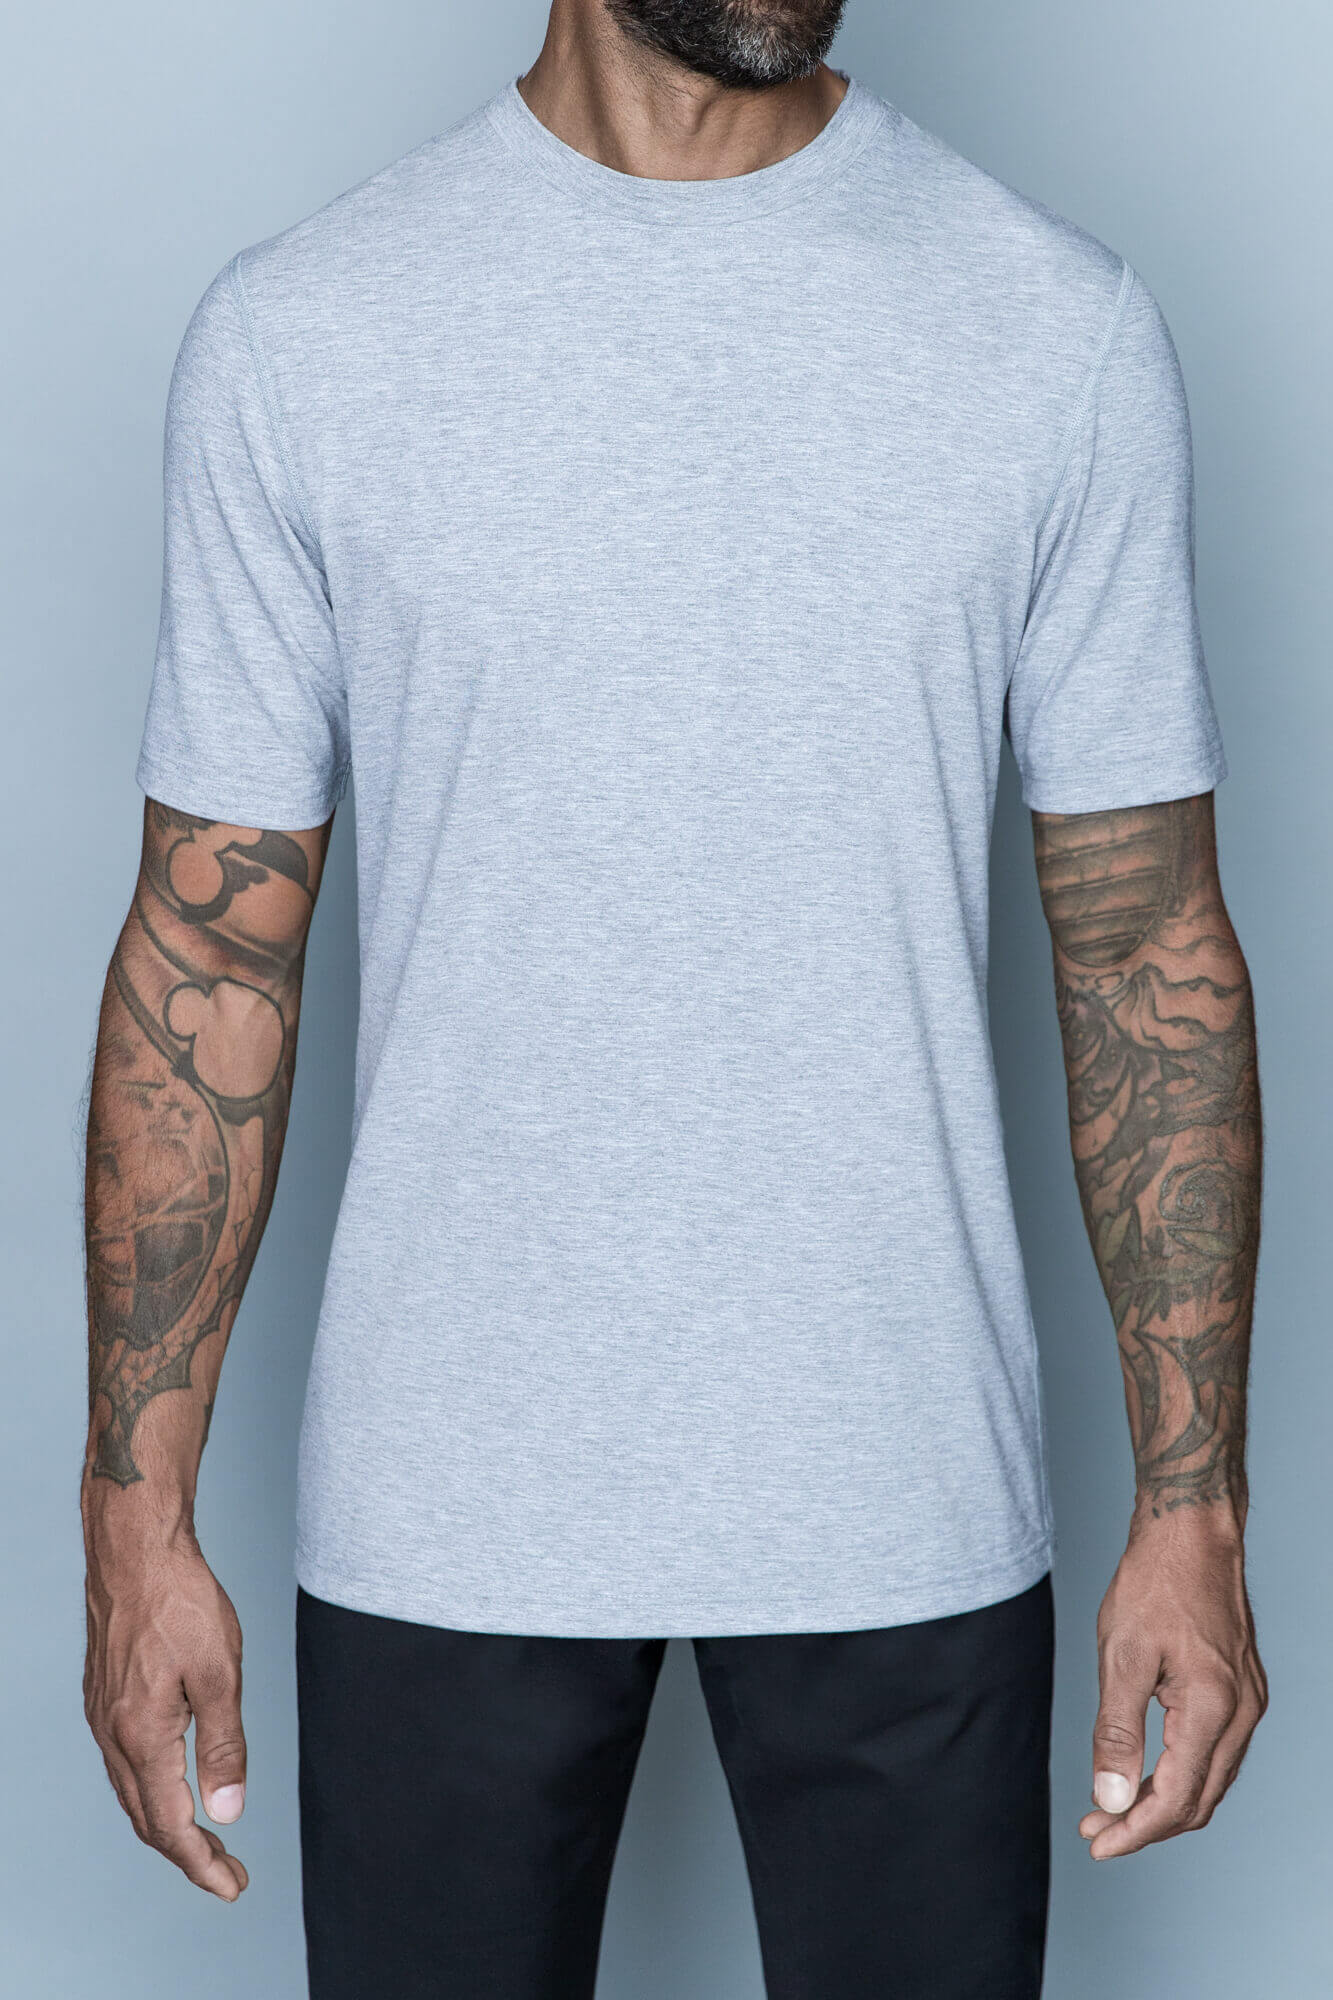 Tee shirts for tall skinny guys by Navas Lab Apparel. Tall slim tees for taller men for everyday use.